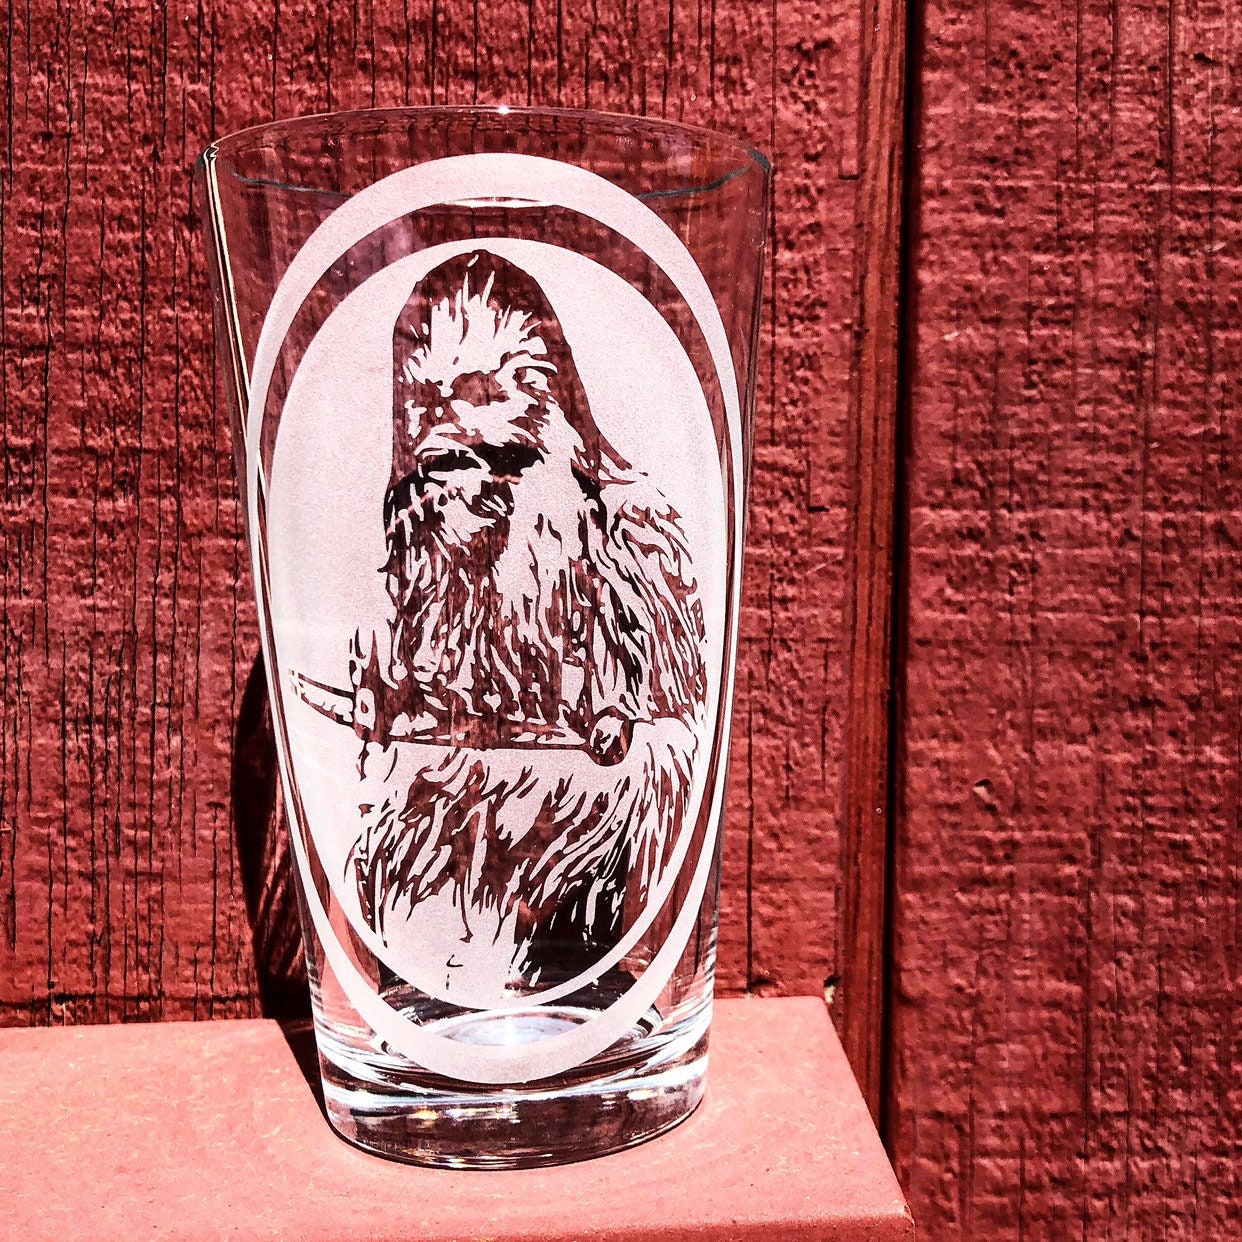 TonUpDecals Stormtrooper Helm Star Wars Inspired 16 oz Hand-made Etched  Beer Mug Glass Stein …